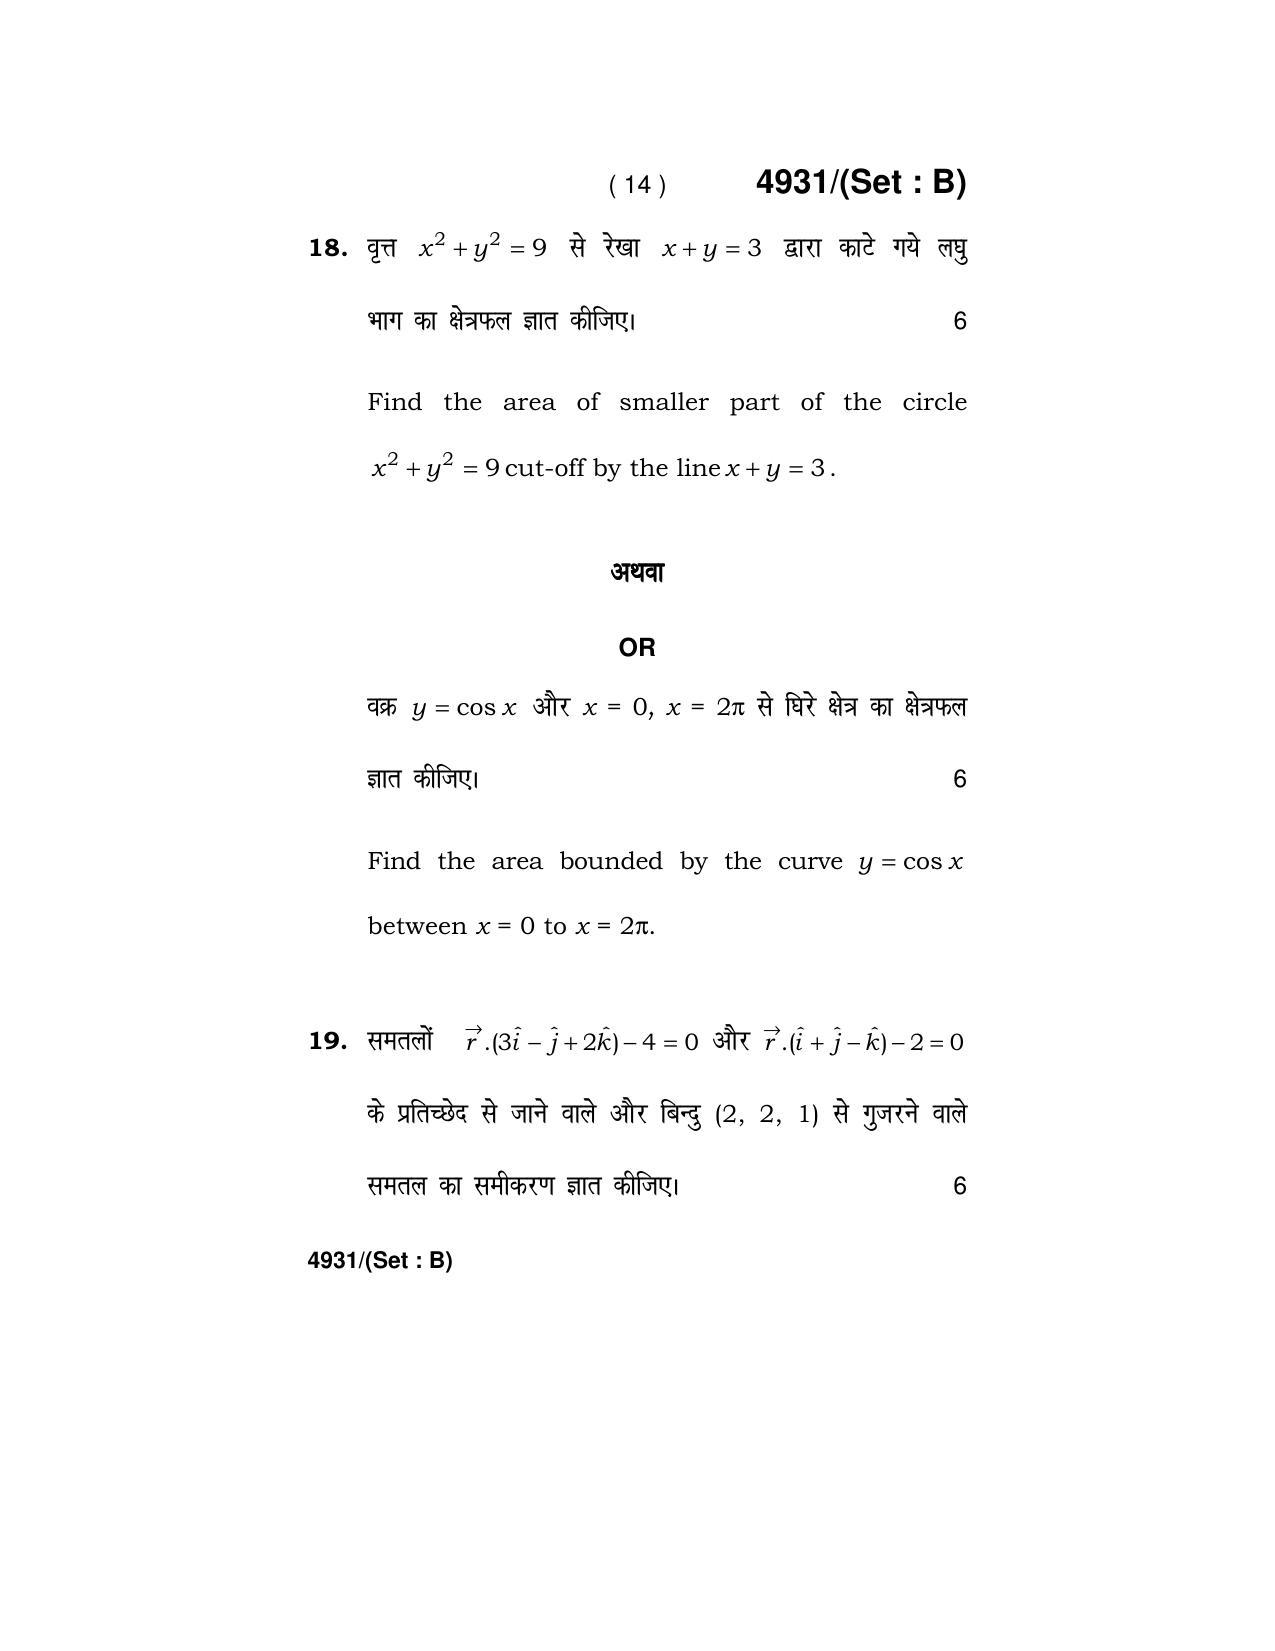 Haryana Board HBSE Class 12 Mathematics 2020 Question Paper - Page 30